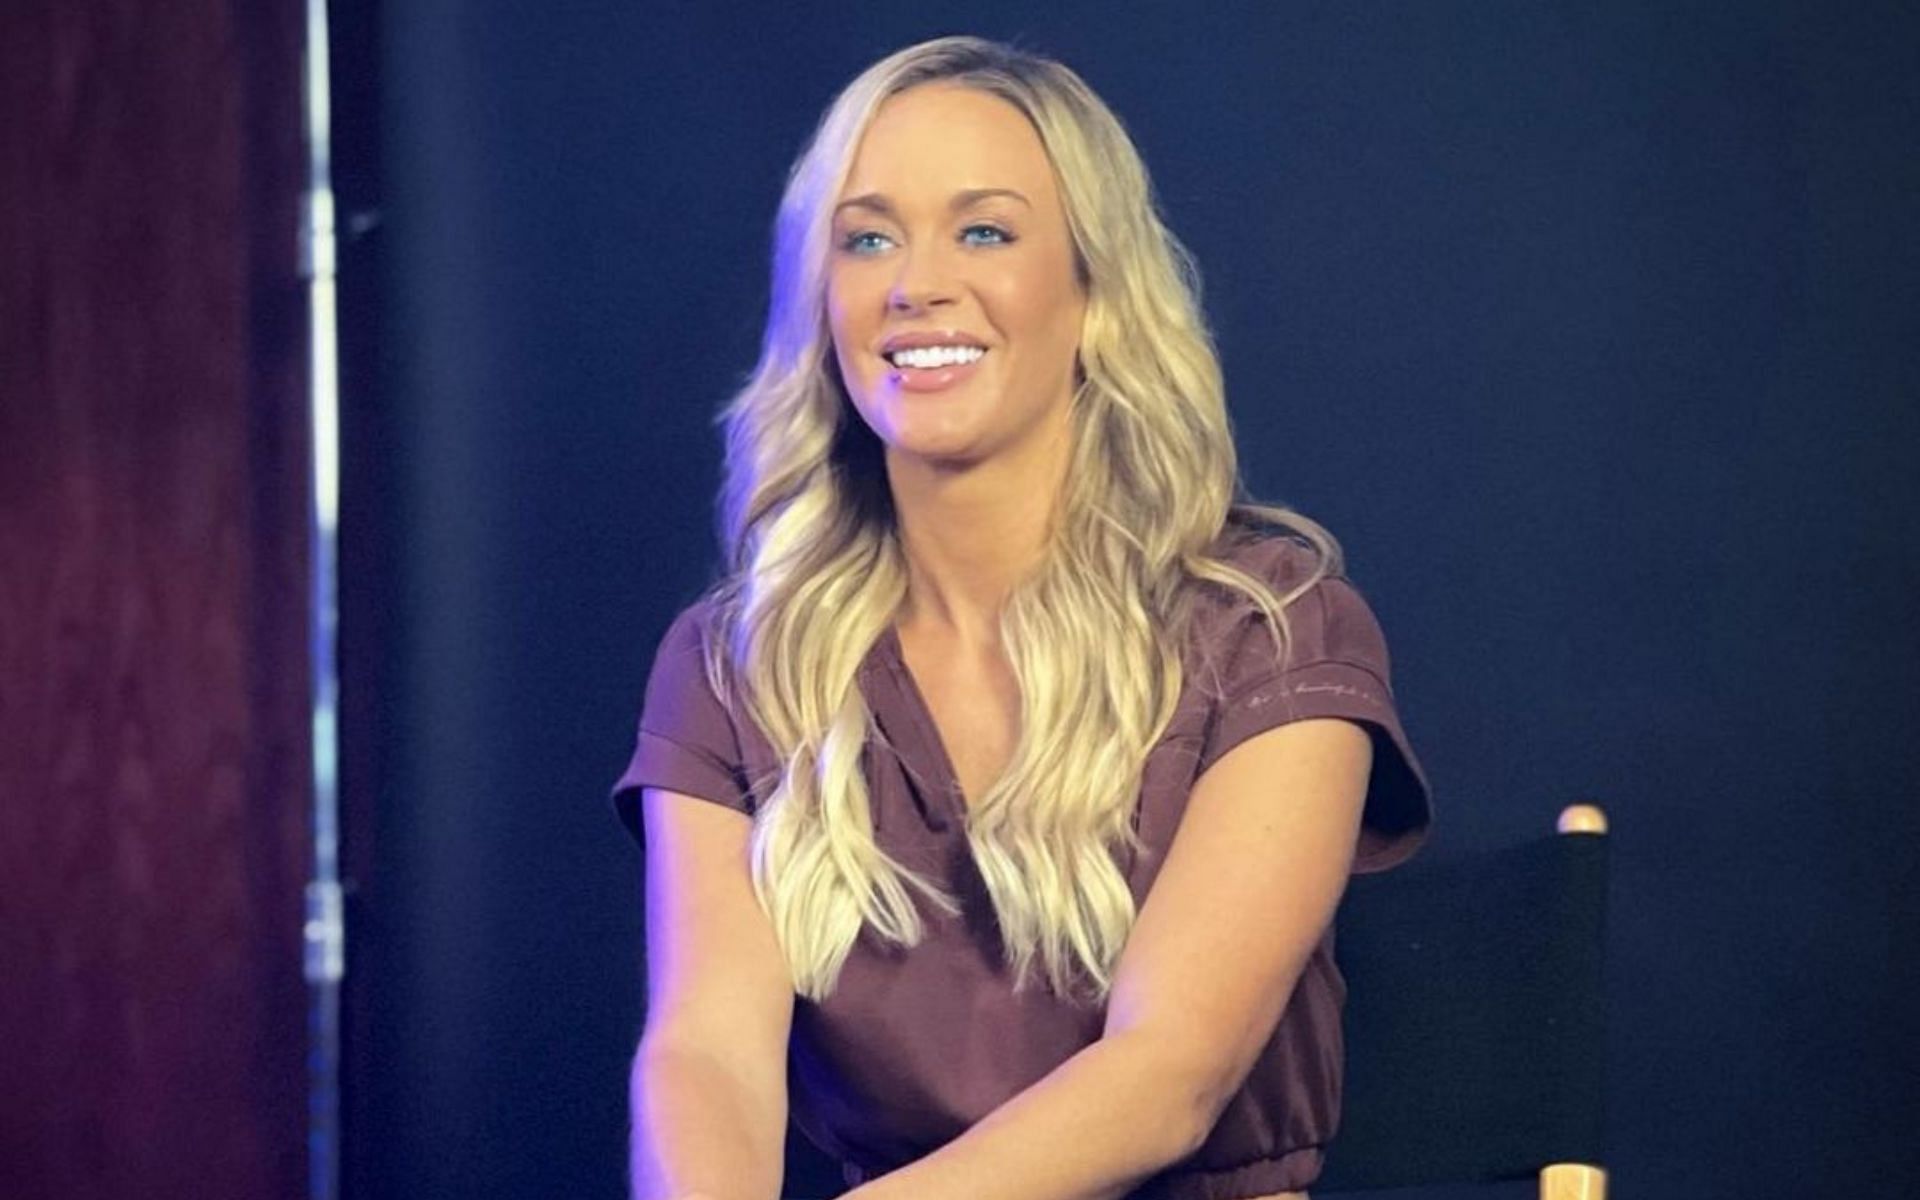 Laura Sanko debuted as a UFC main roster color commentator in Feb. 2023, whereas her UFC PPV commentary debut materialized in Sept. 2023 [Image courtesy: @laura_sanko on Instagram]